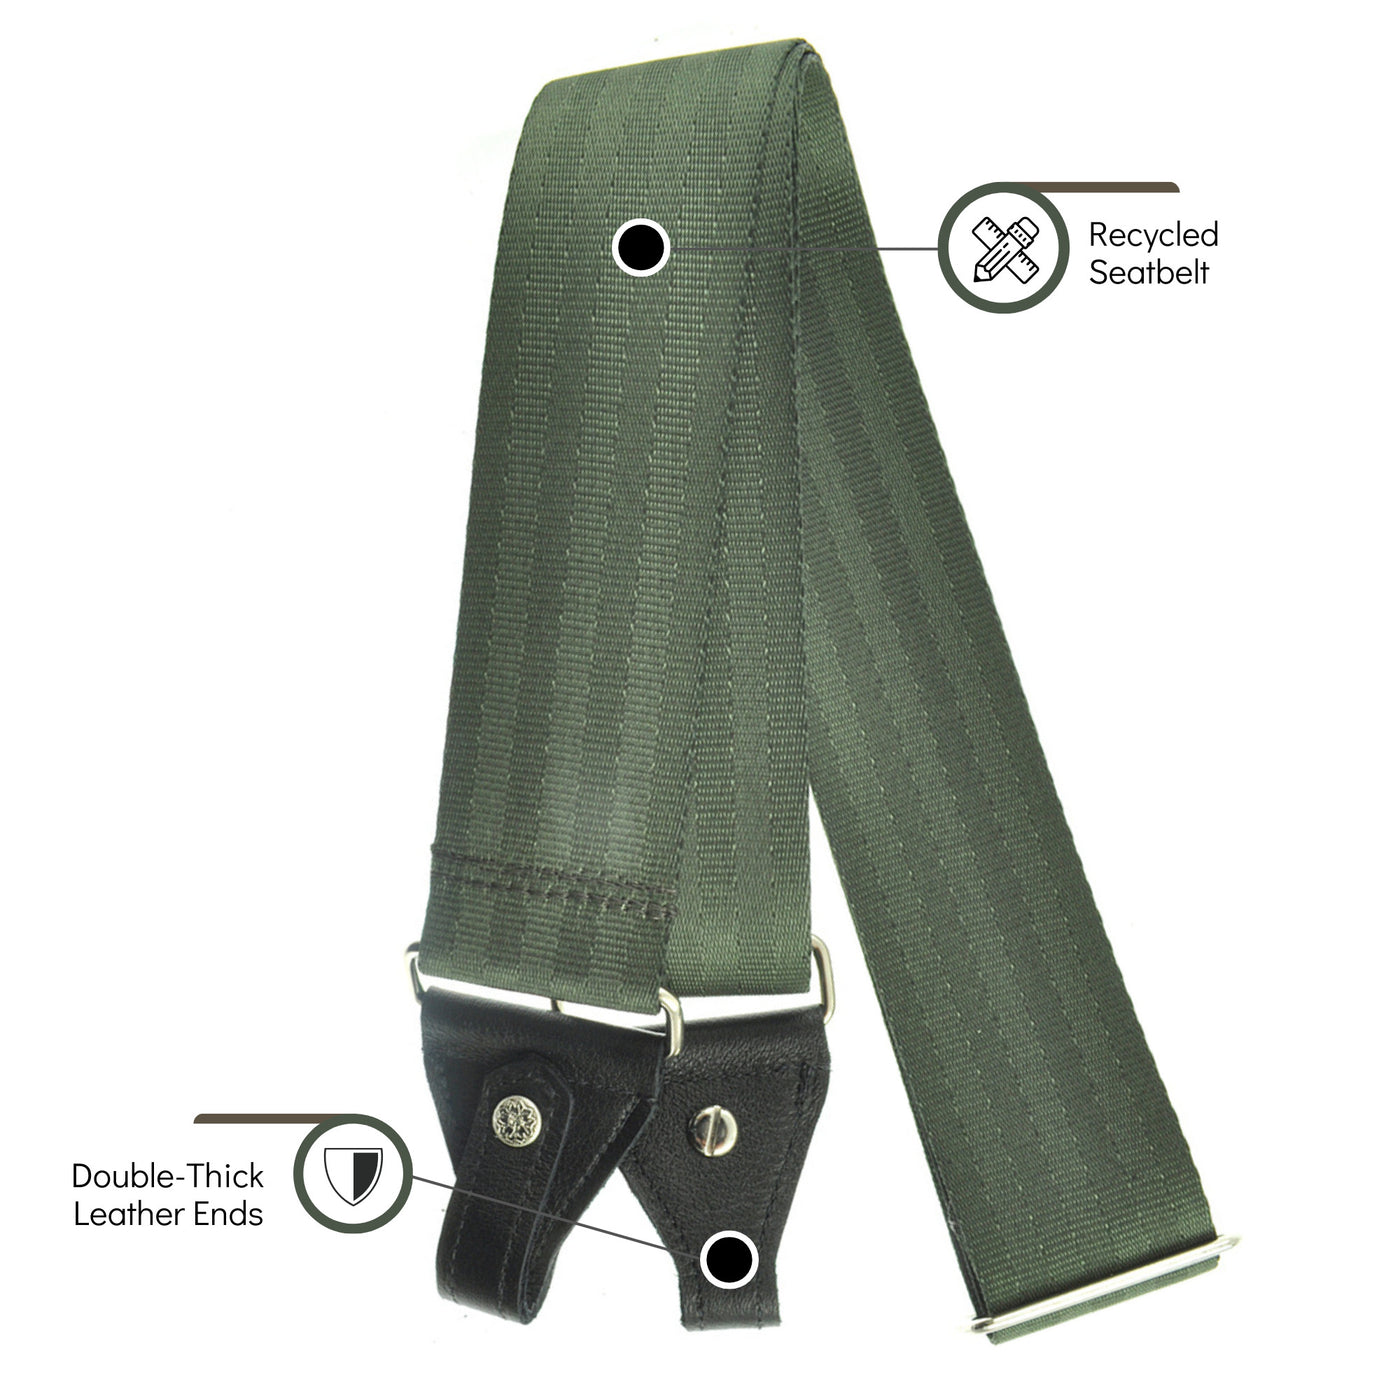 Souldier BJC0000FG04BK - Handmade Souldier Solid Banjo Strap, 2 Inches Wide and Adjustable from 33" to 60" Made in the USA, Green